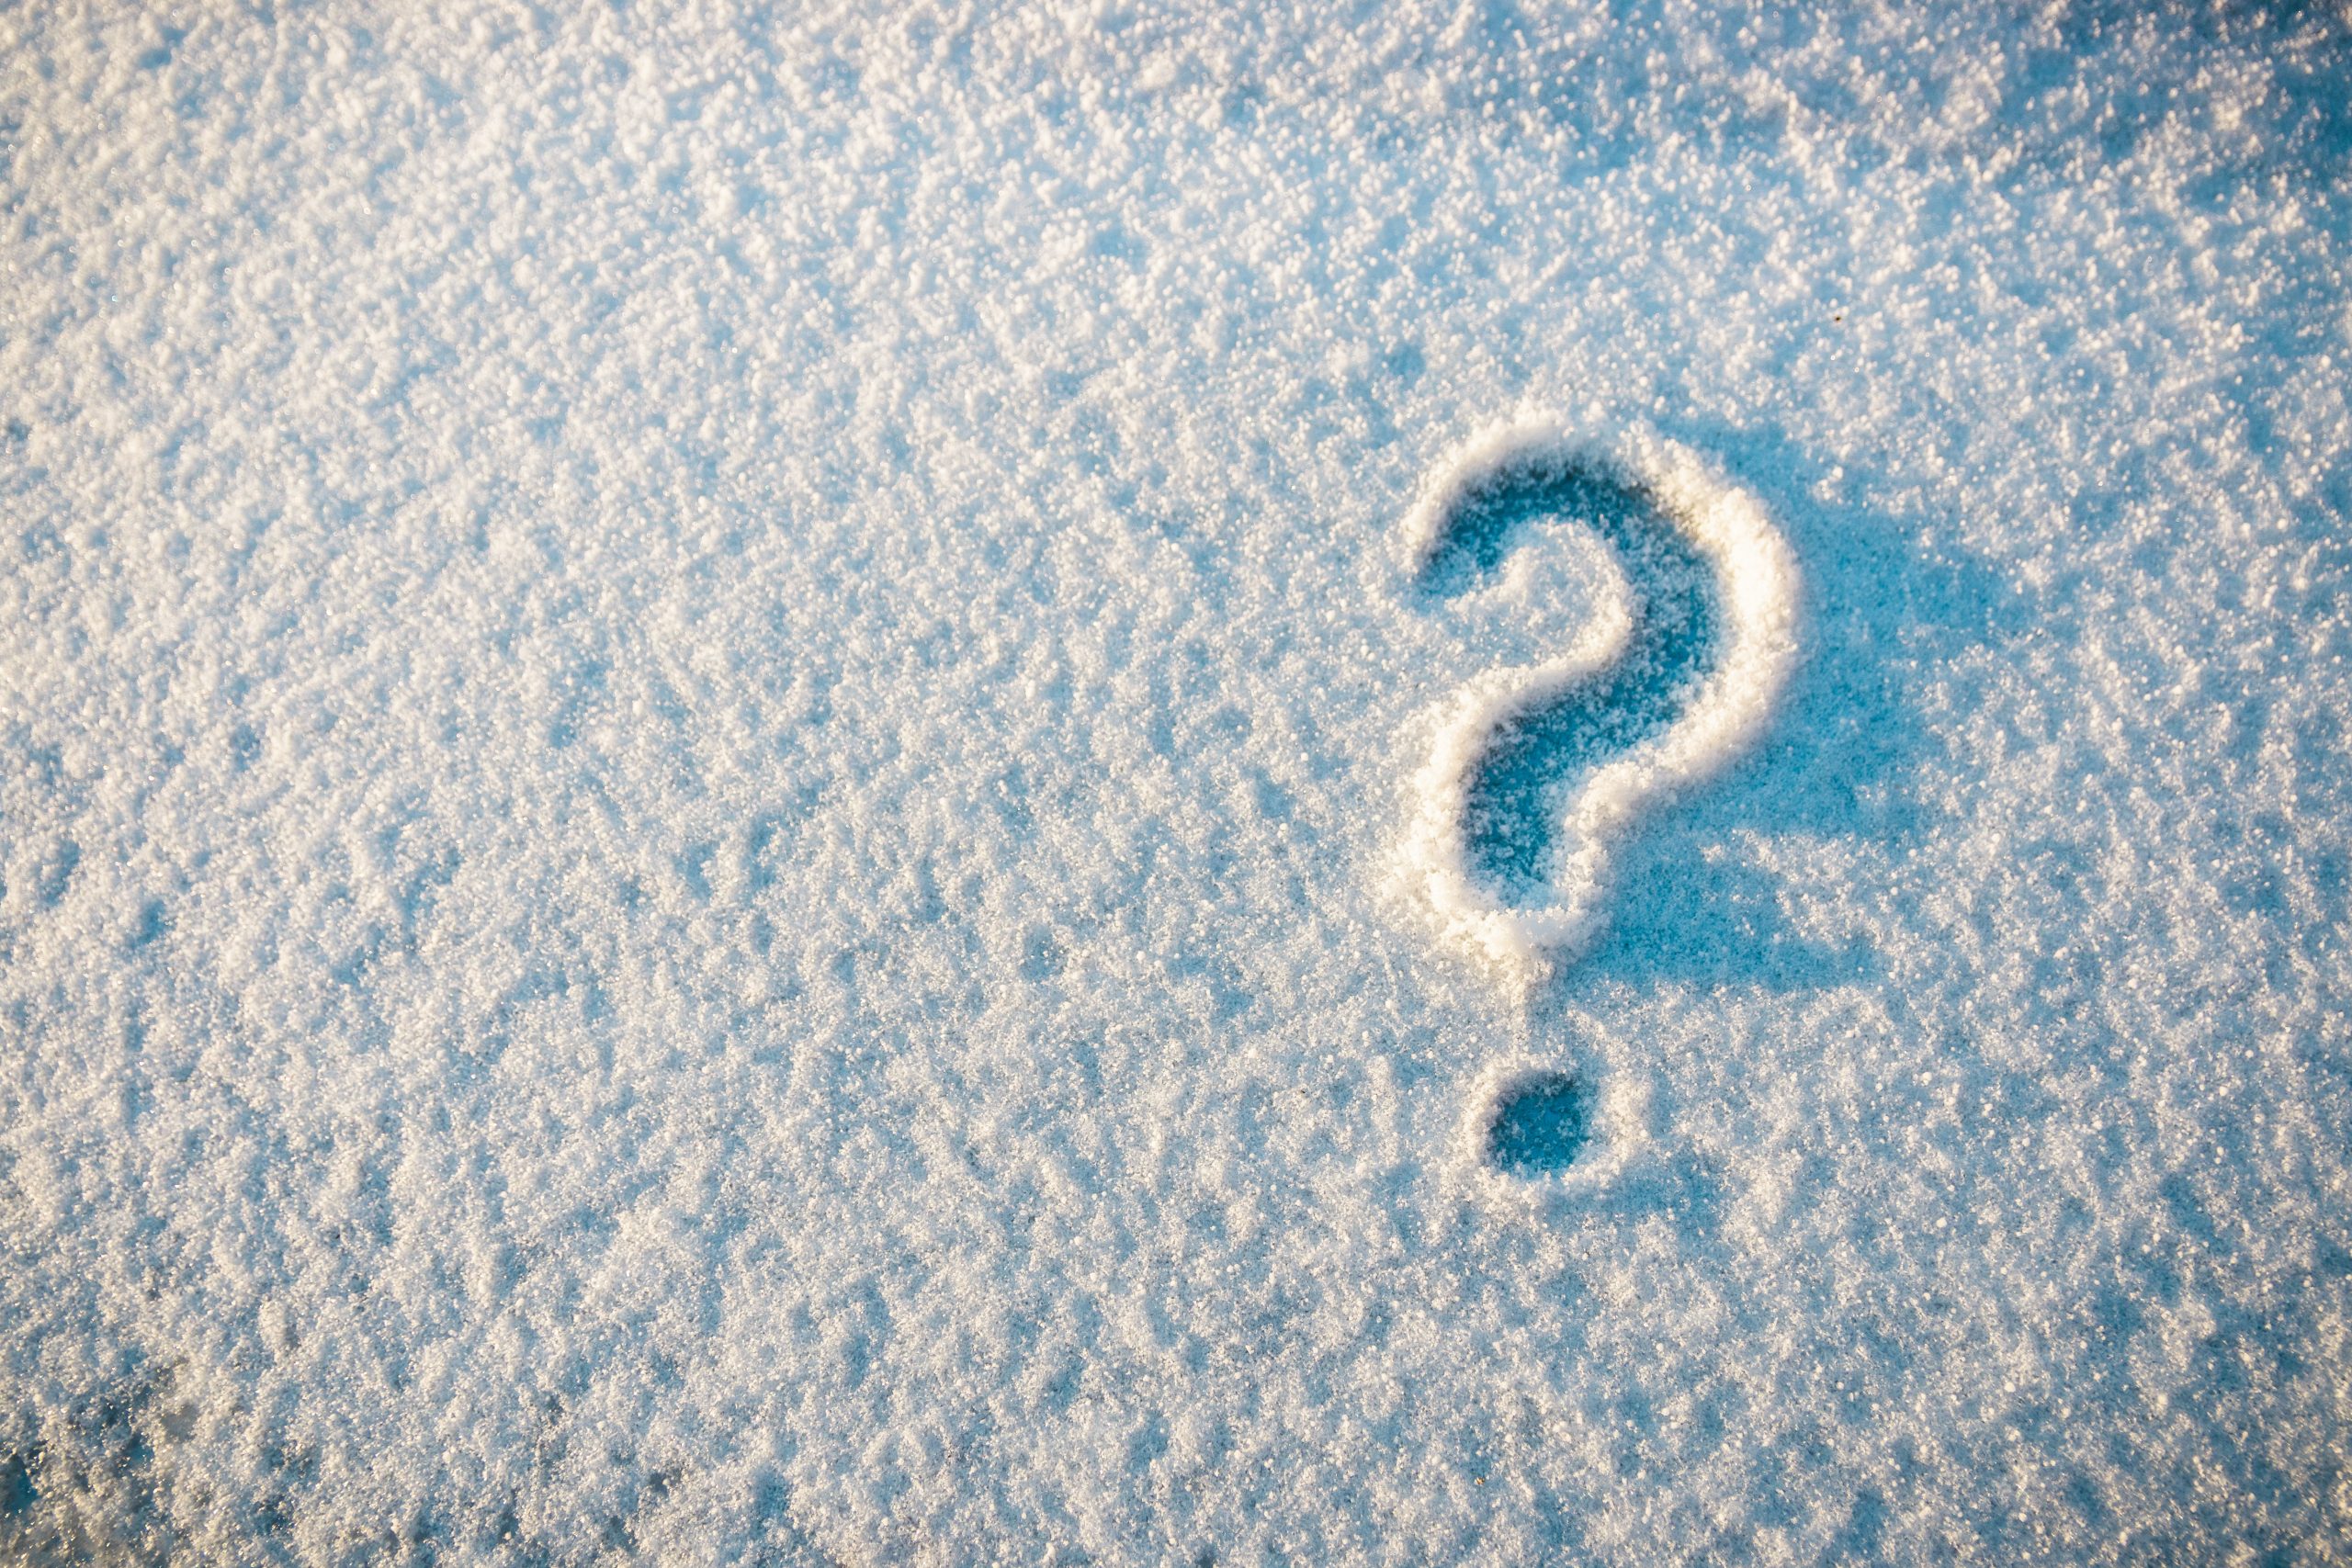 question mark on snow